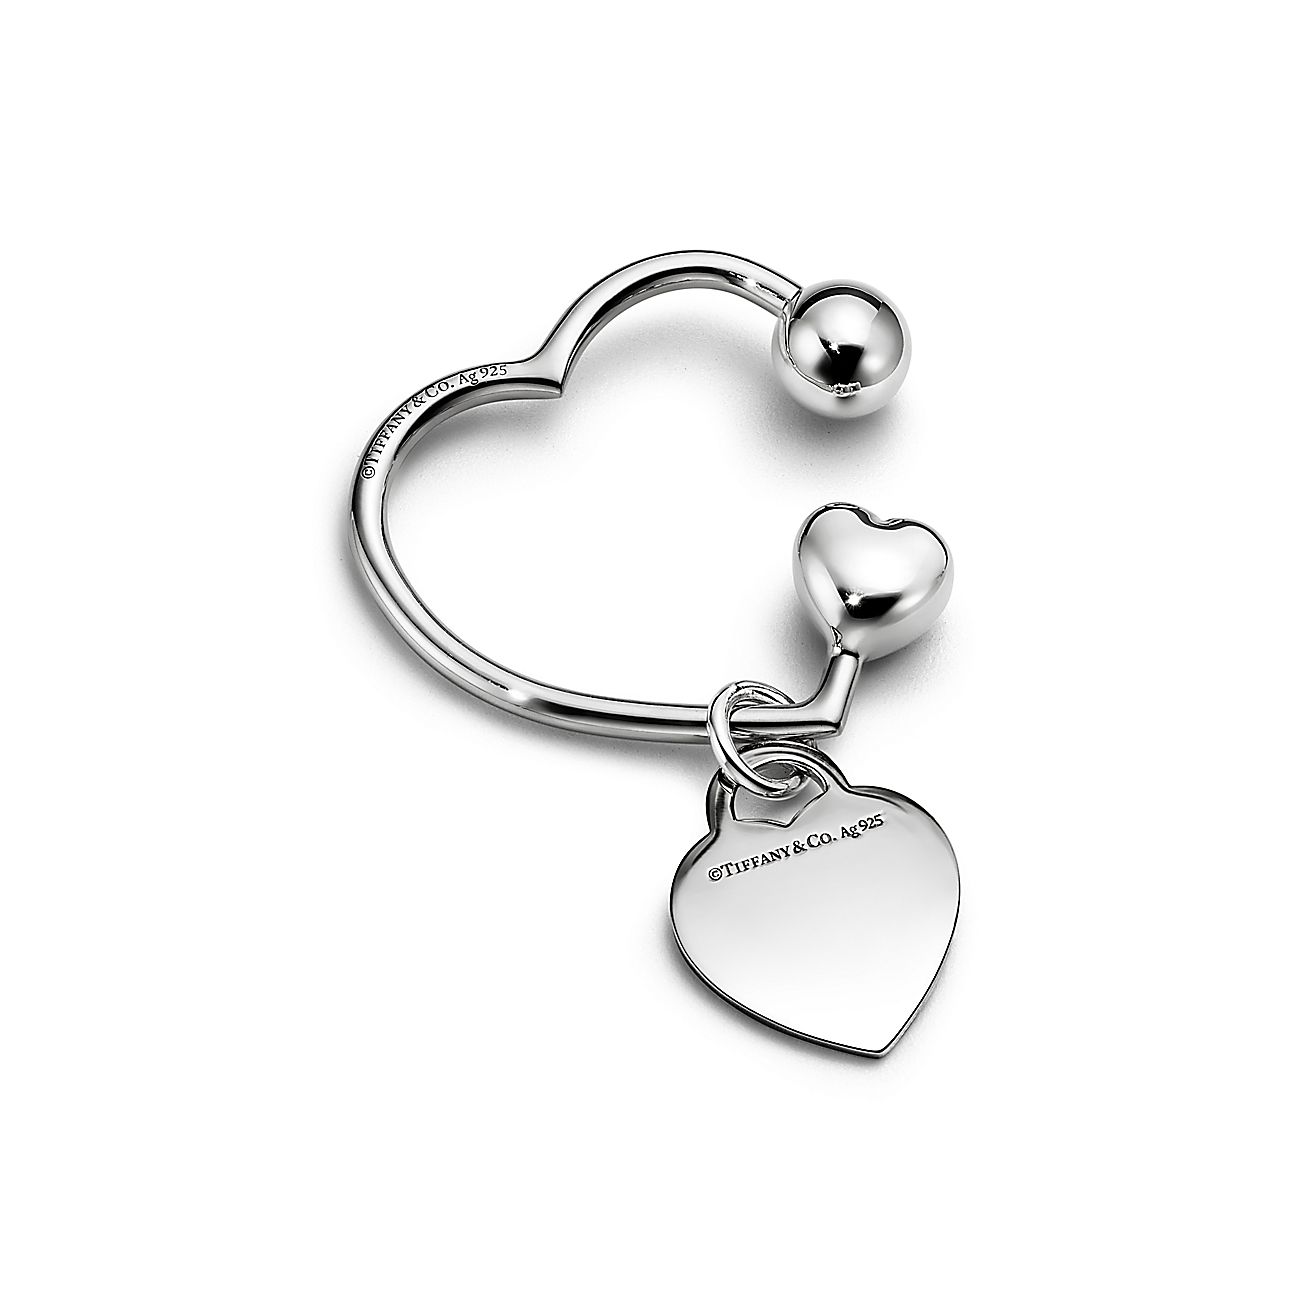 Return to Tiffany® Round and Heart Tag Key Ring in Silver with